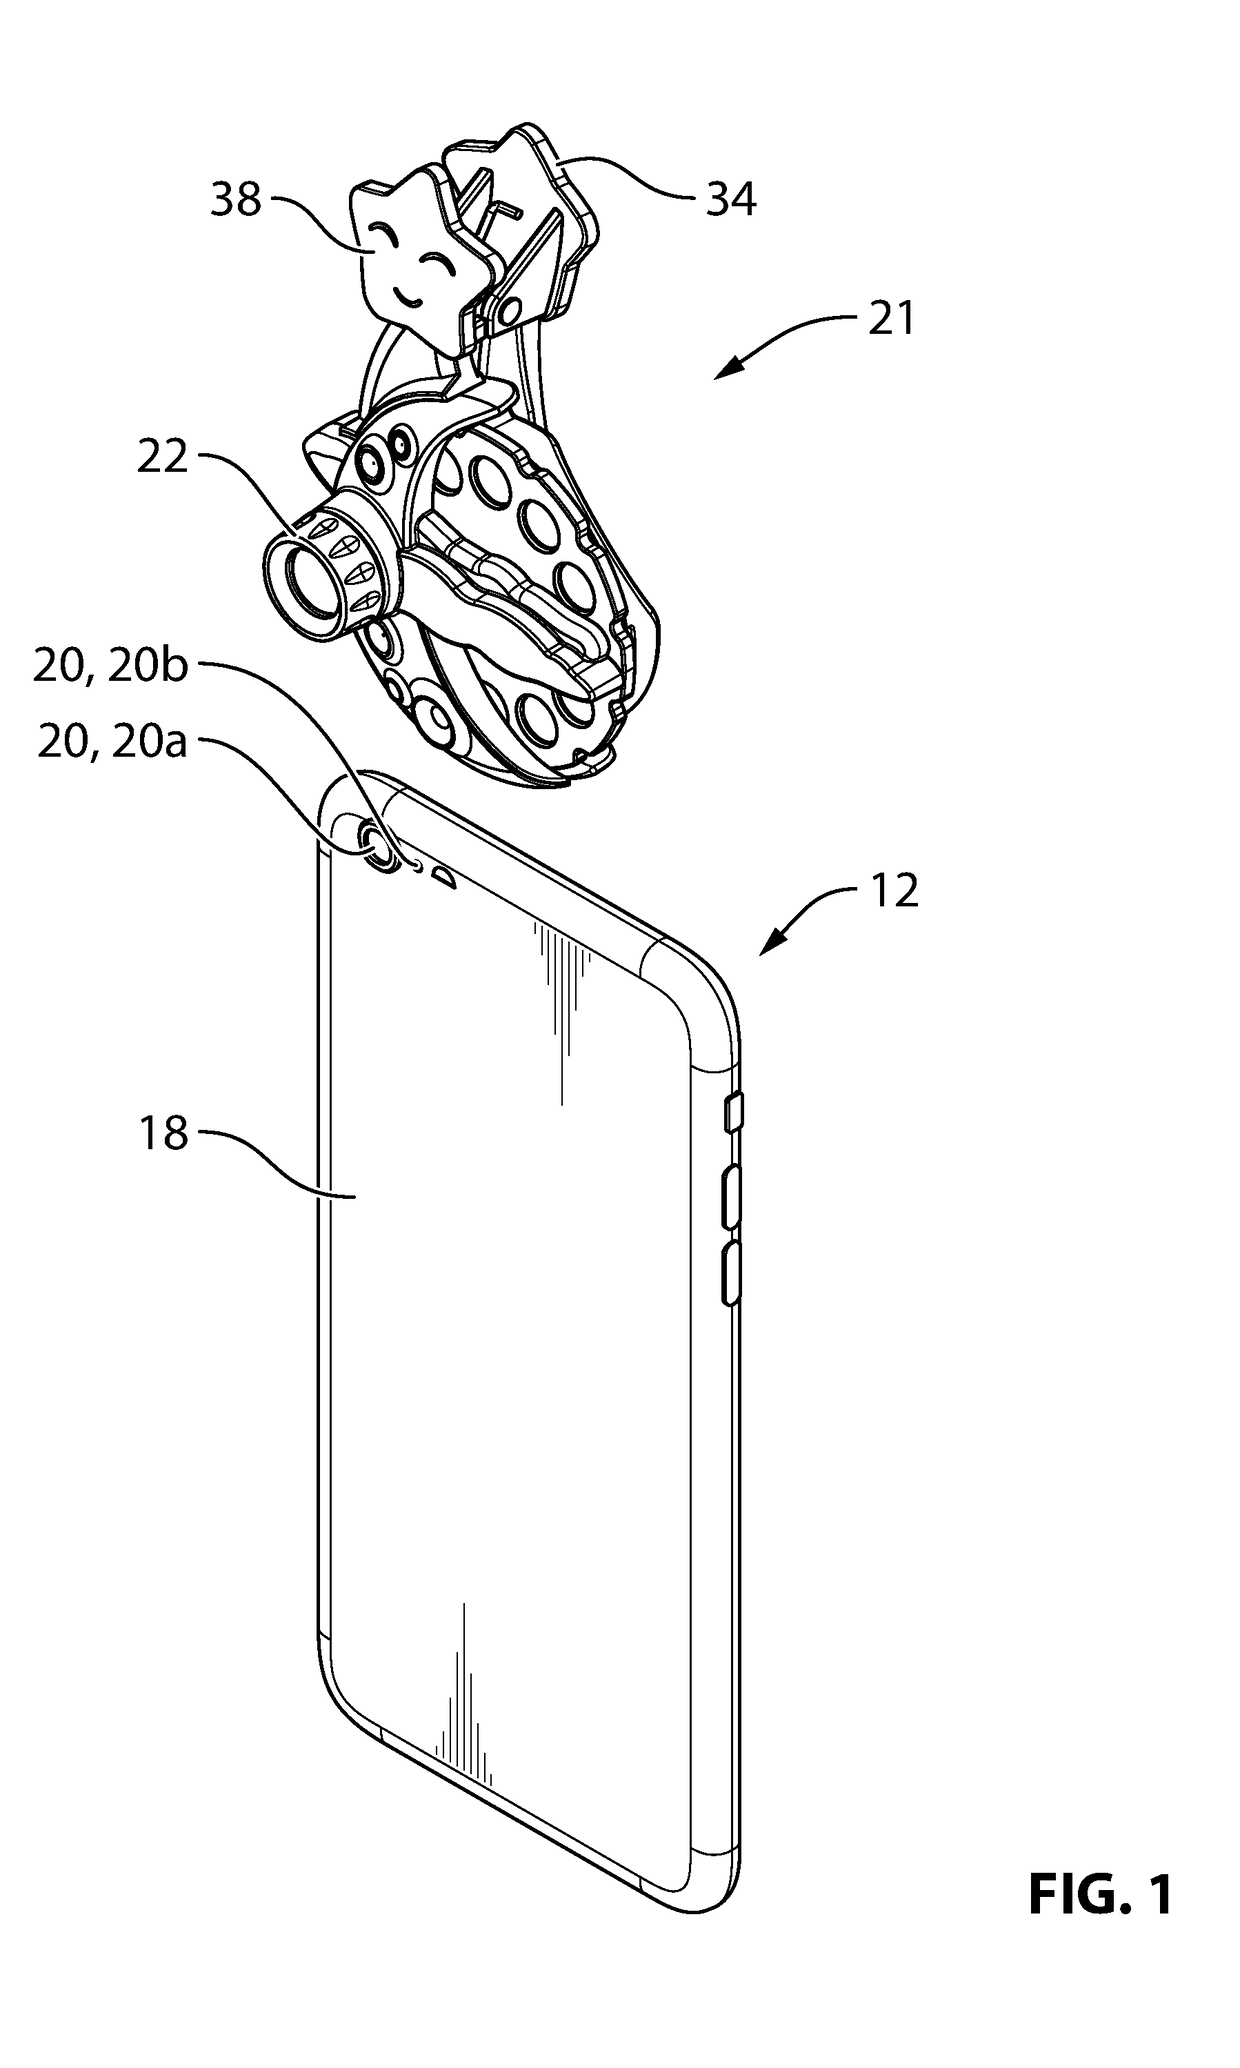 Clip for mounting external device to electronic device